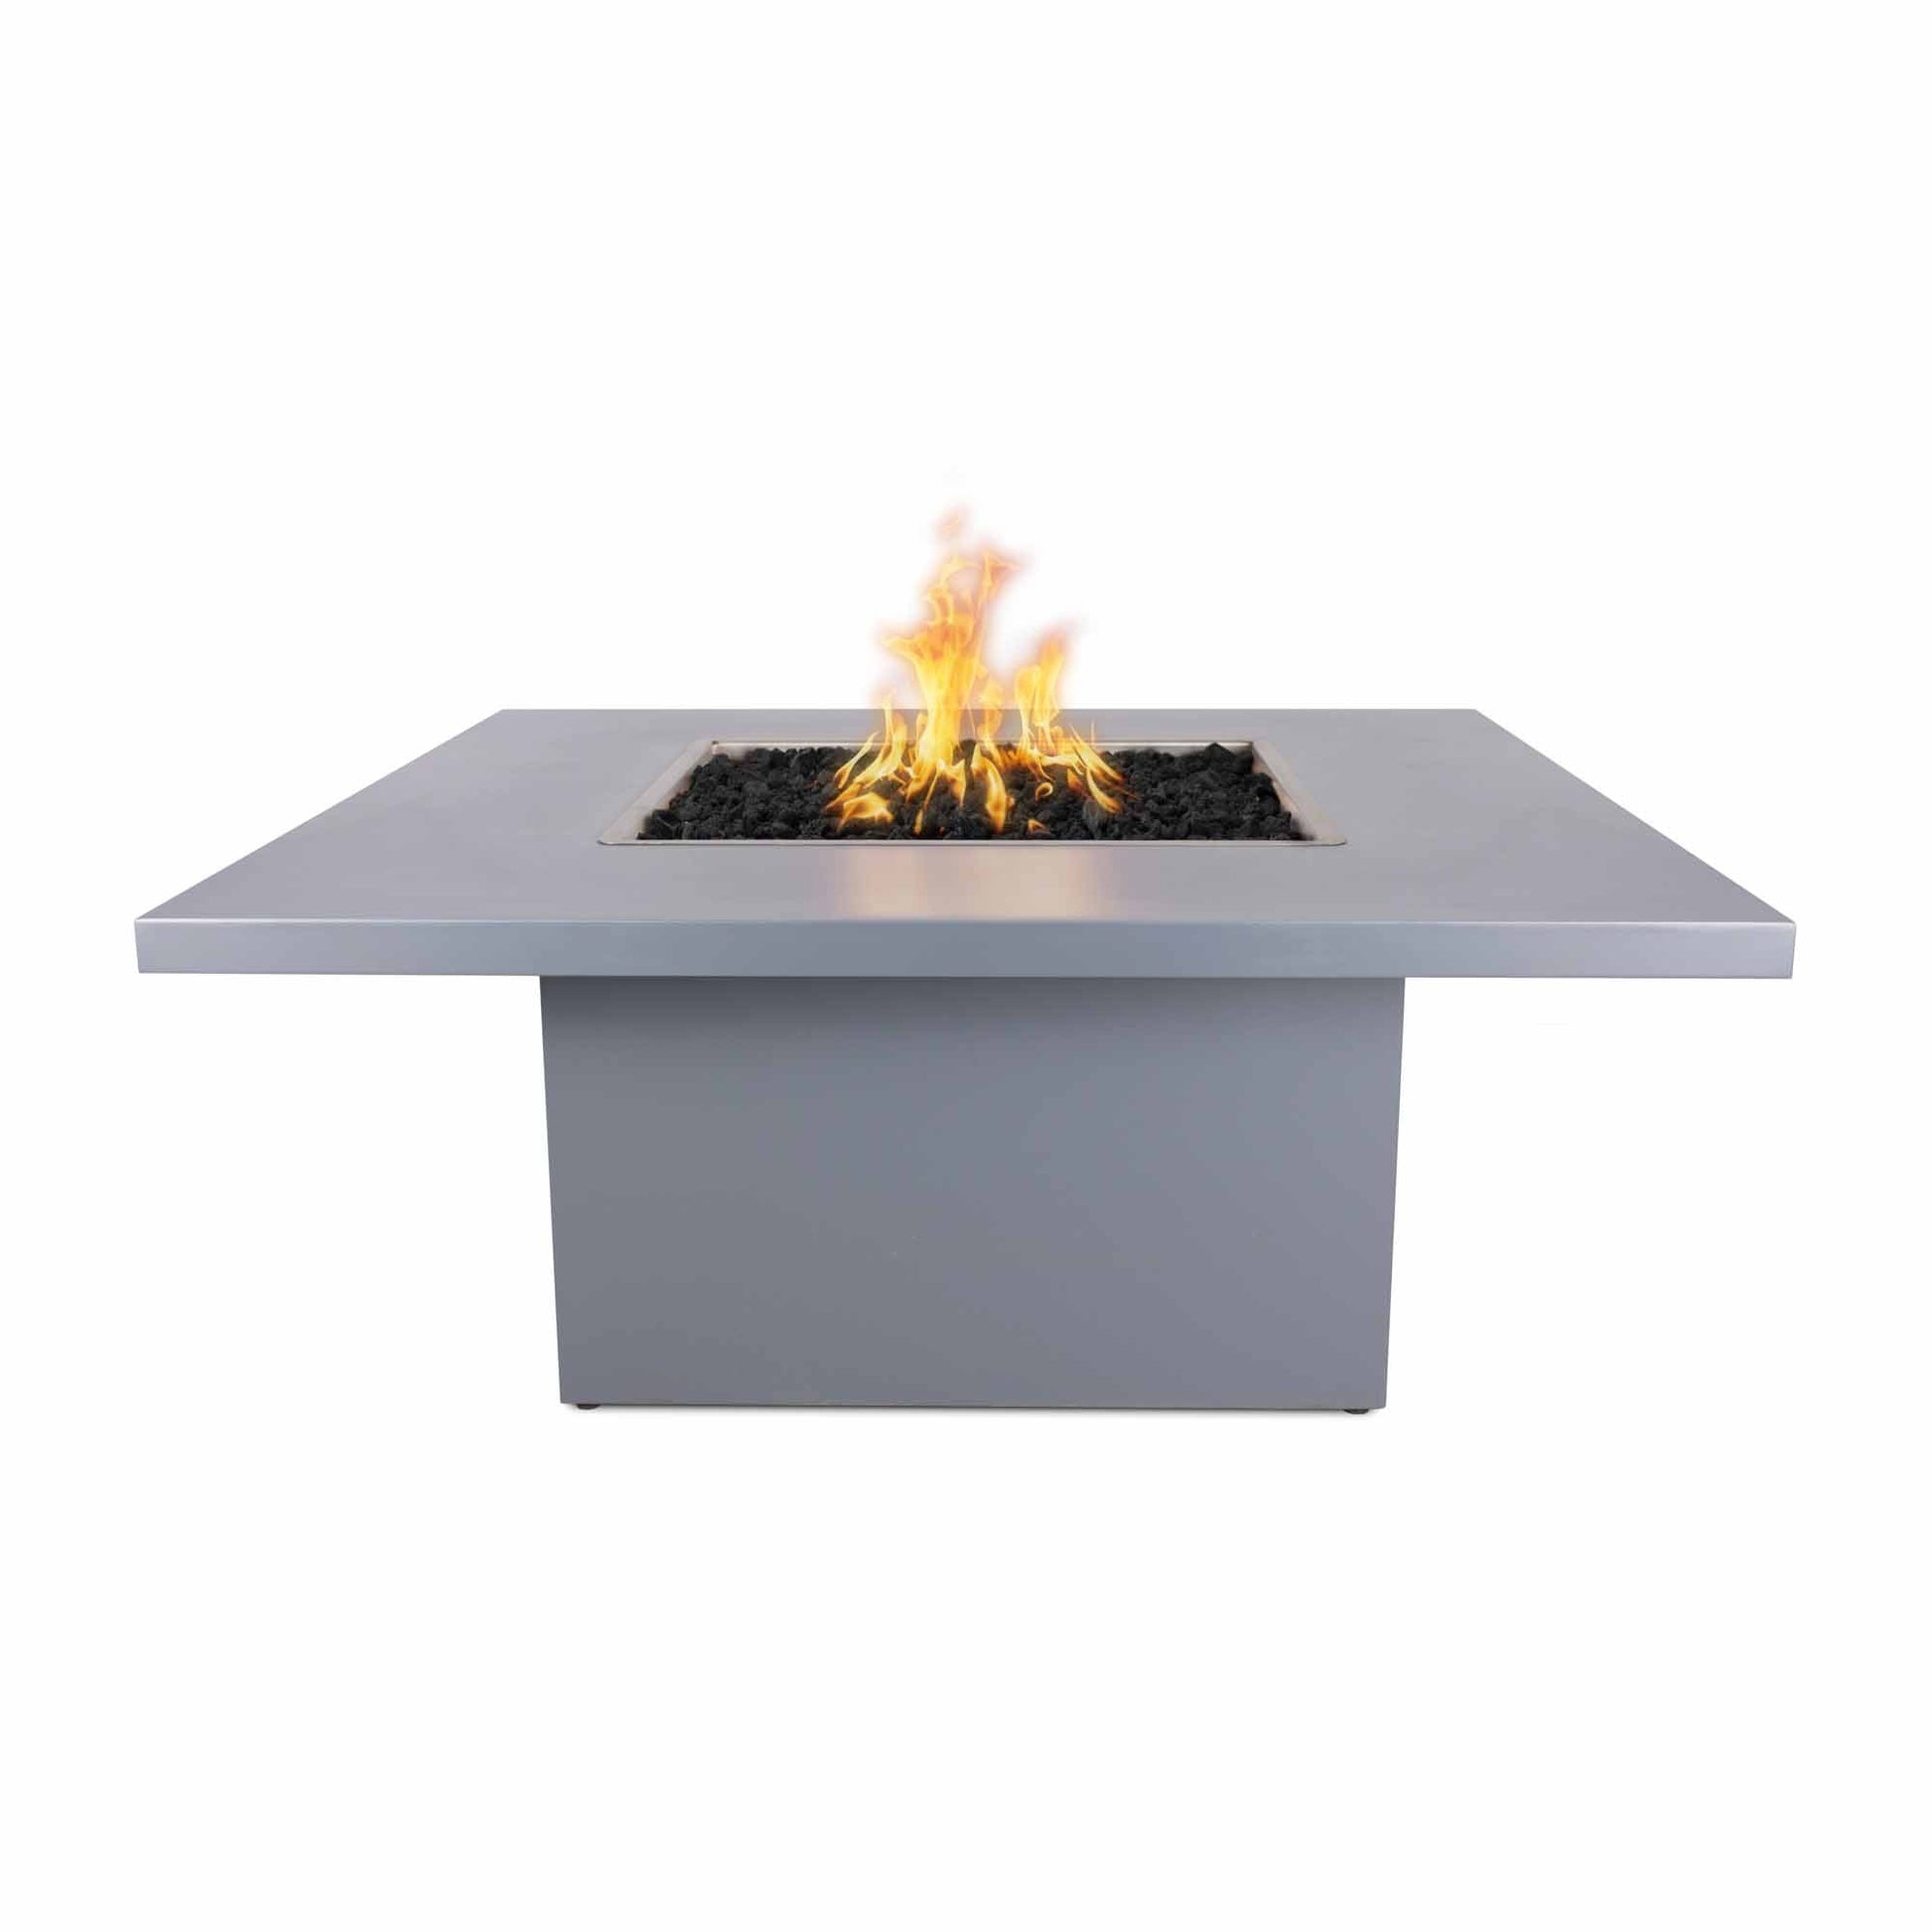 The Outdoor Plus Square Bella 36" Hammered Copper Natural Gas Fire Pit with 110V Electronic Ignition